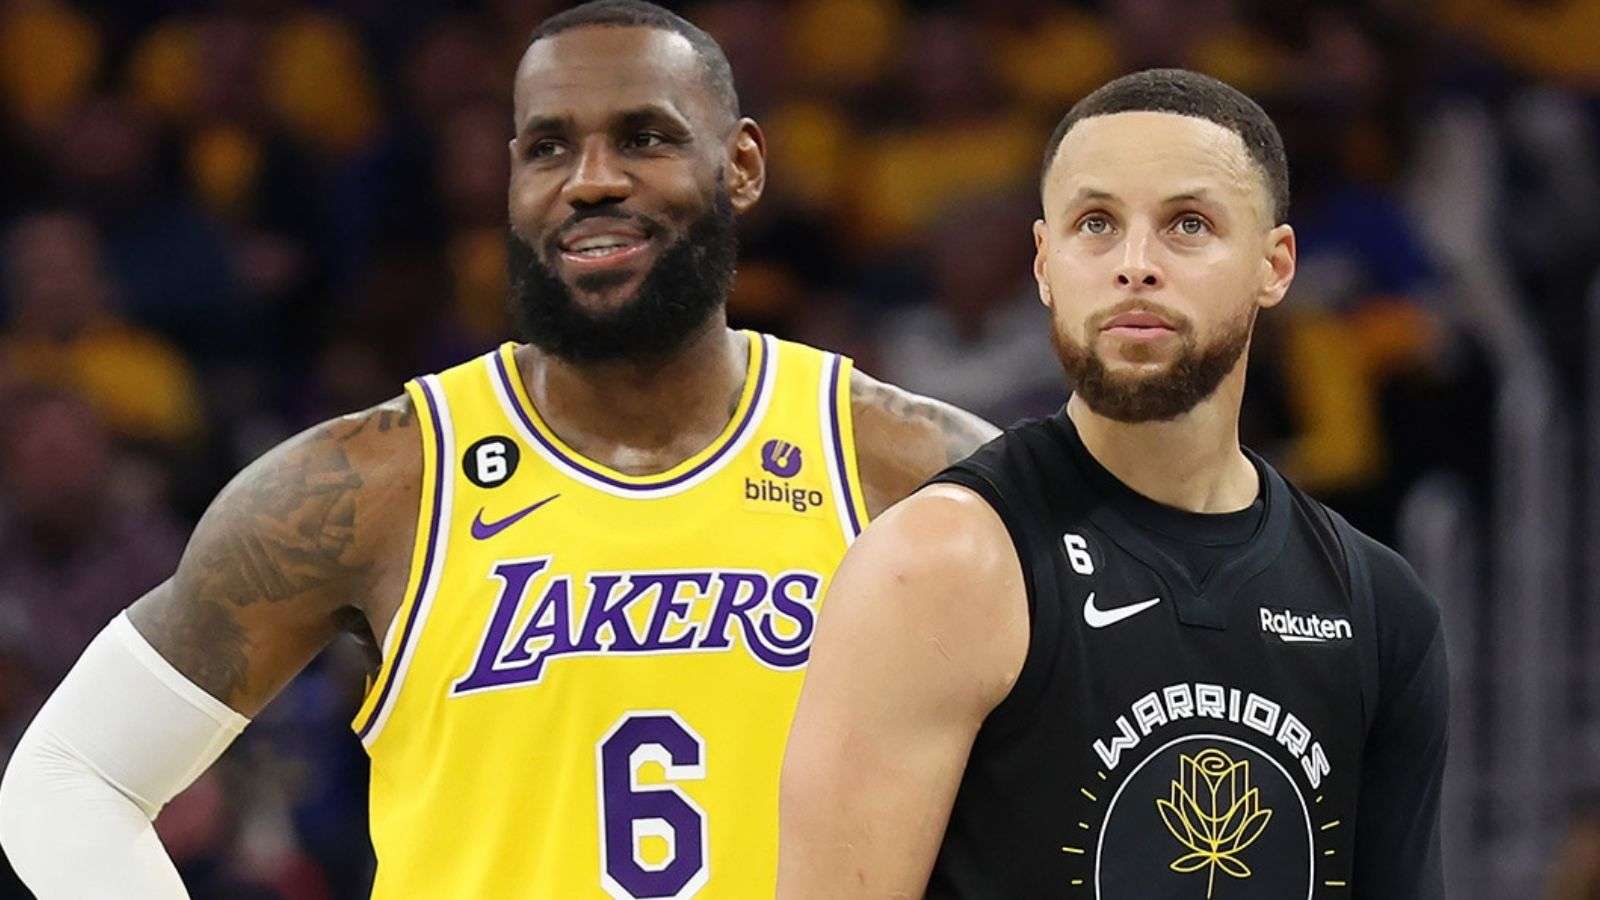 LeBron James and Stephen Curry share he court in Wesern Conference rivalry matchup.